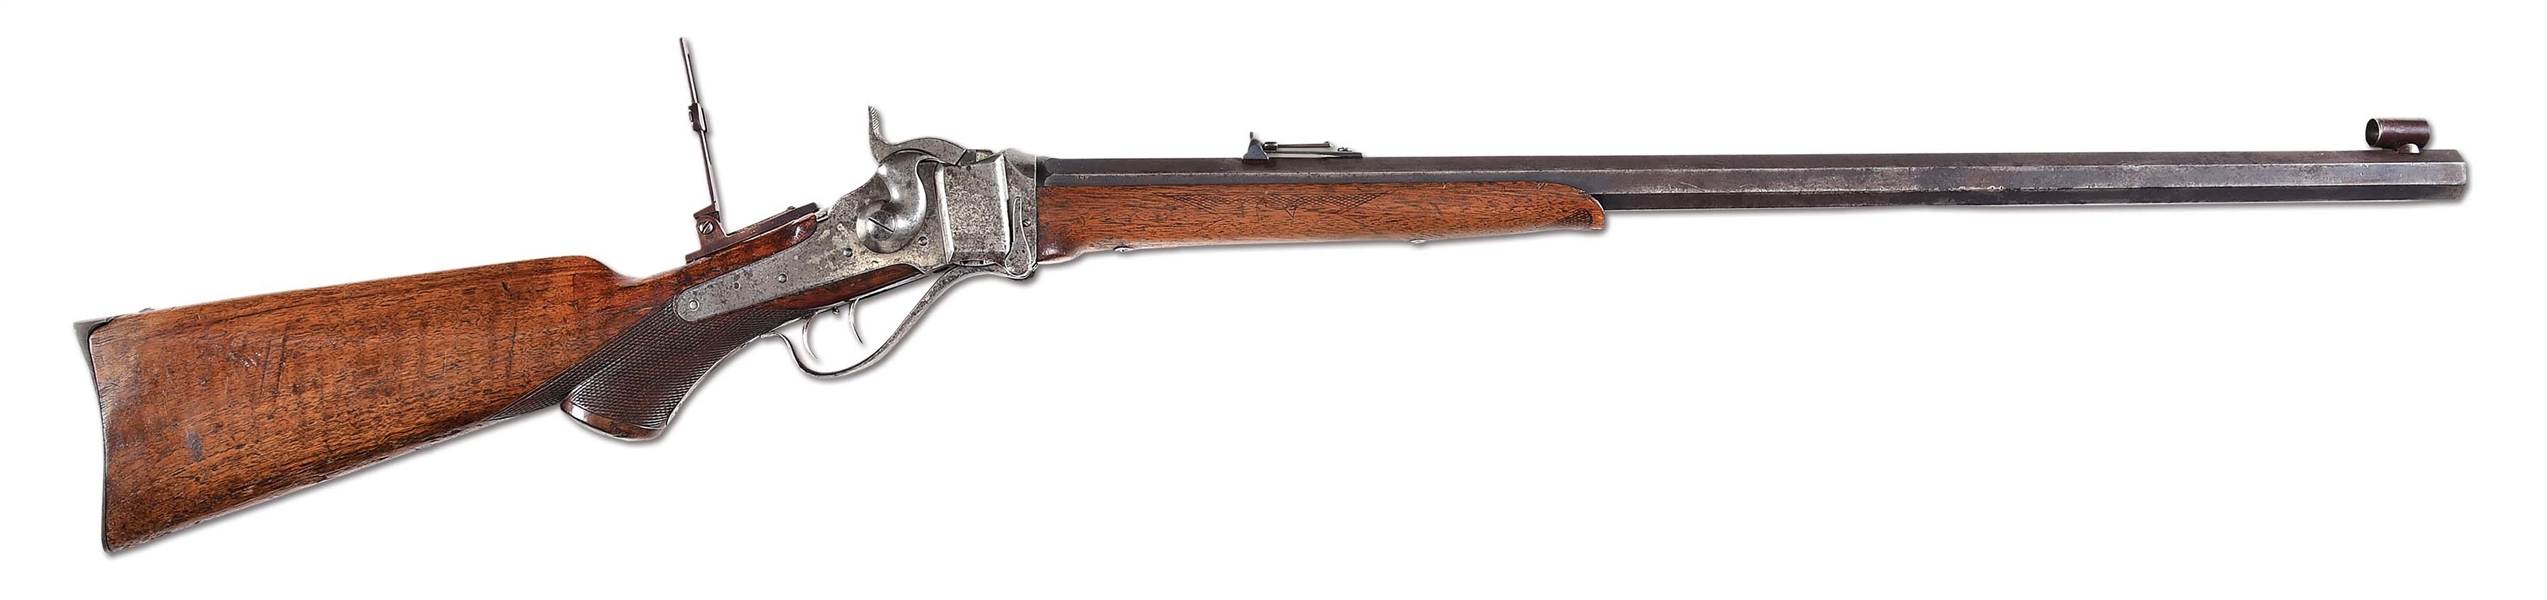 (A) HISTORIC MODEL 1874 SHARPS RIFLE SPECIFICALLY ORDERED BY CAPTAIN E.M. COATES OF FORT FETTERMAN WYOMING IN 1875